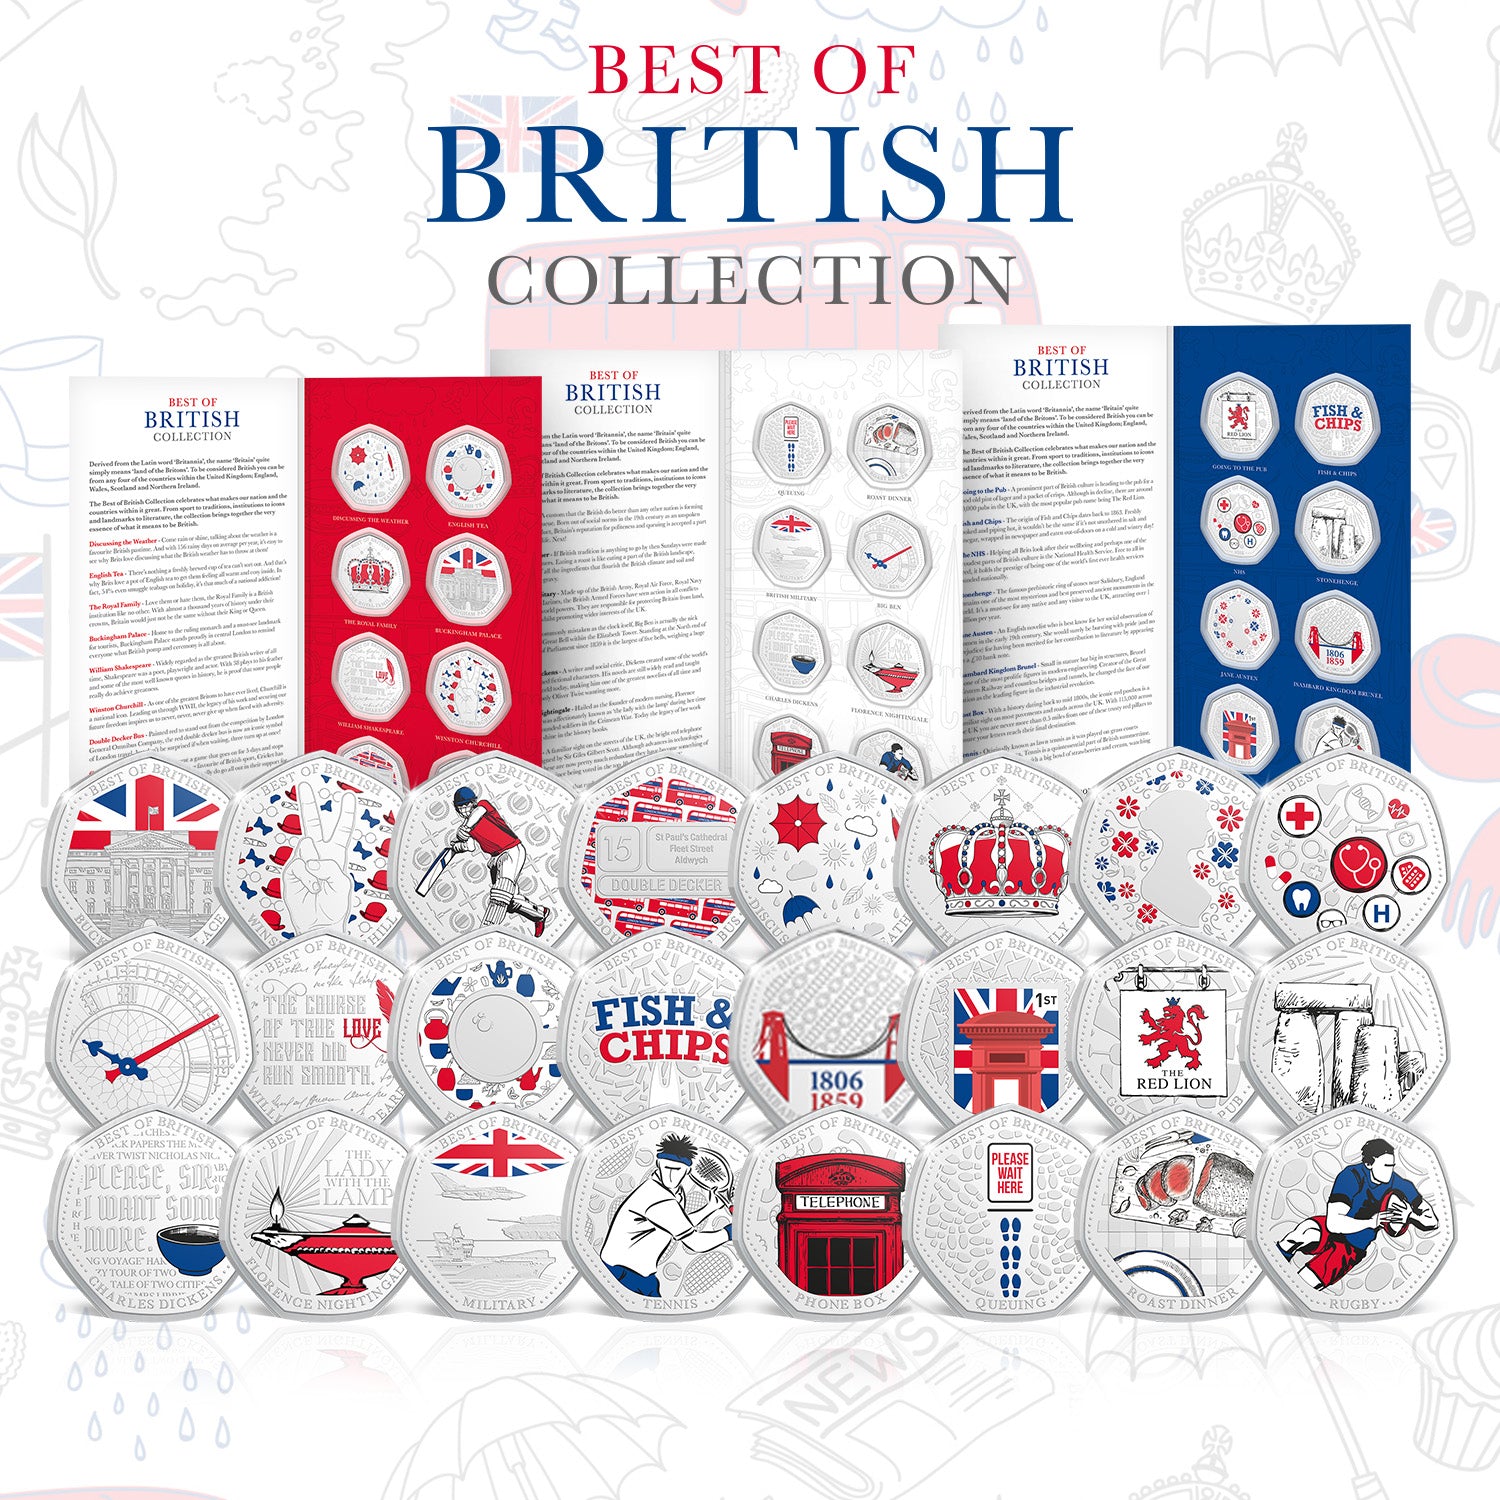 The Best of British Silver Plated Bundle